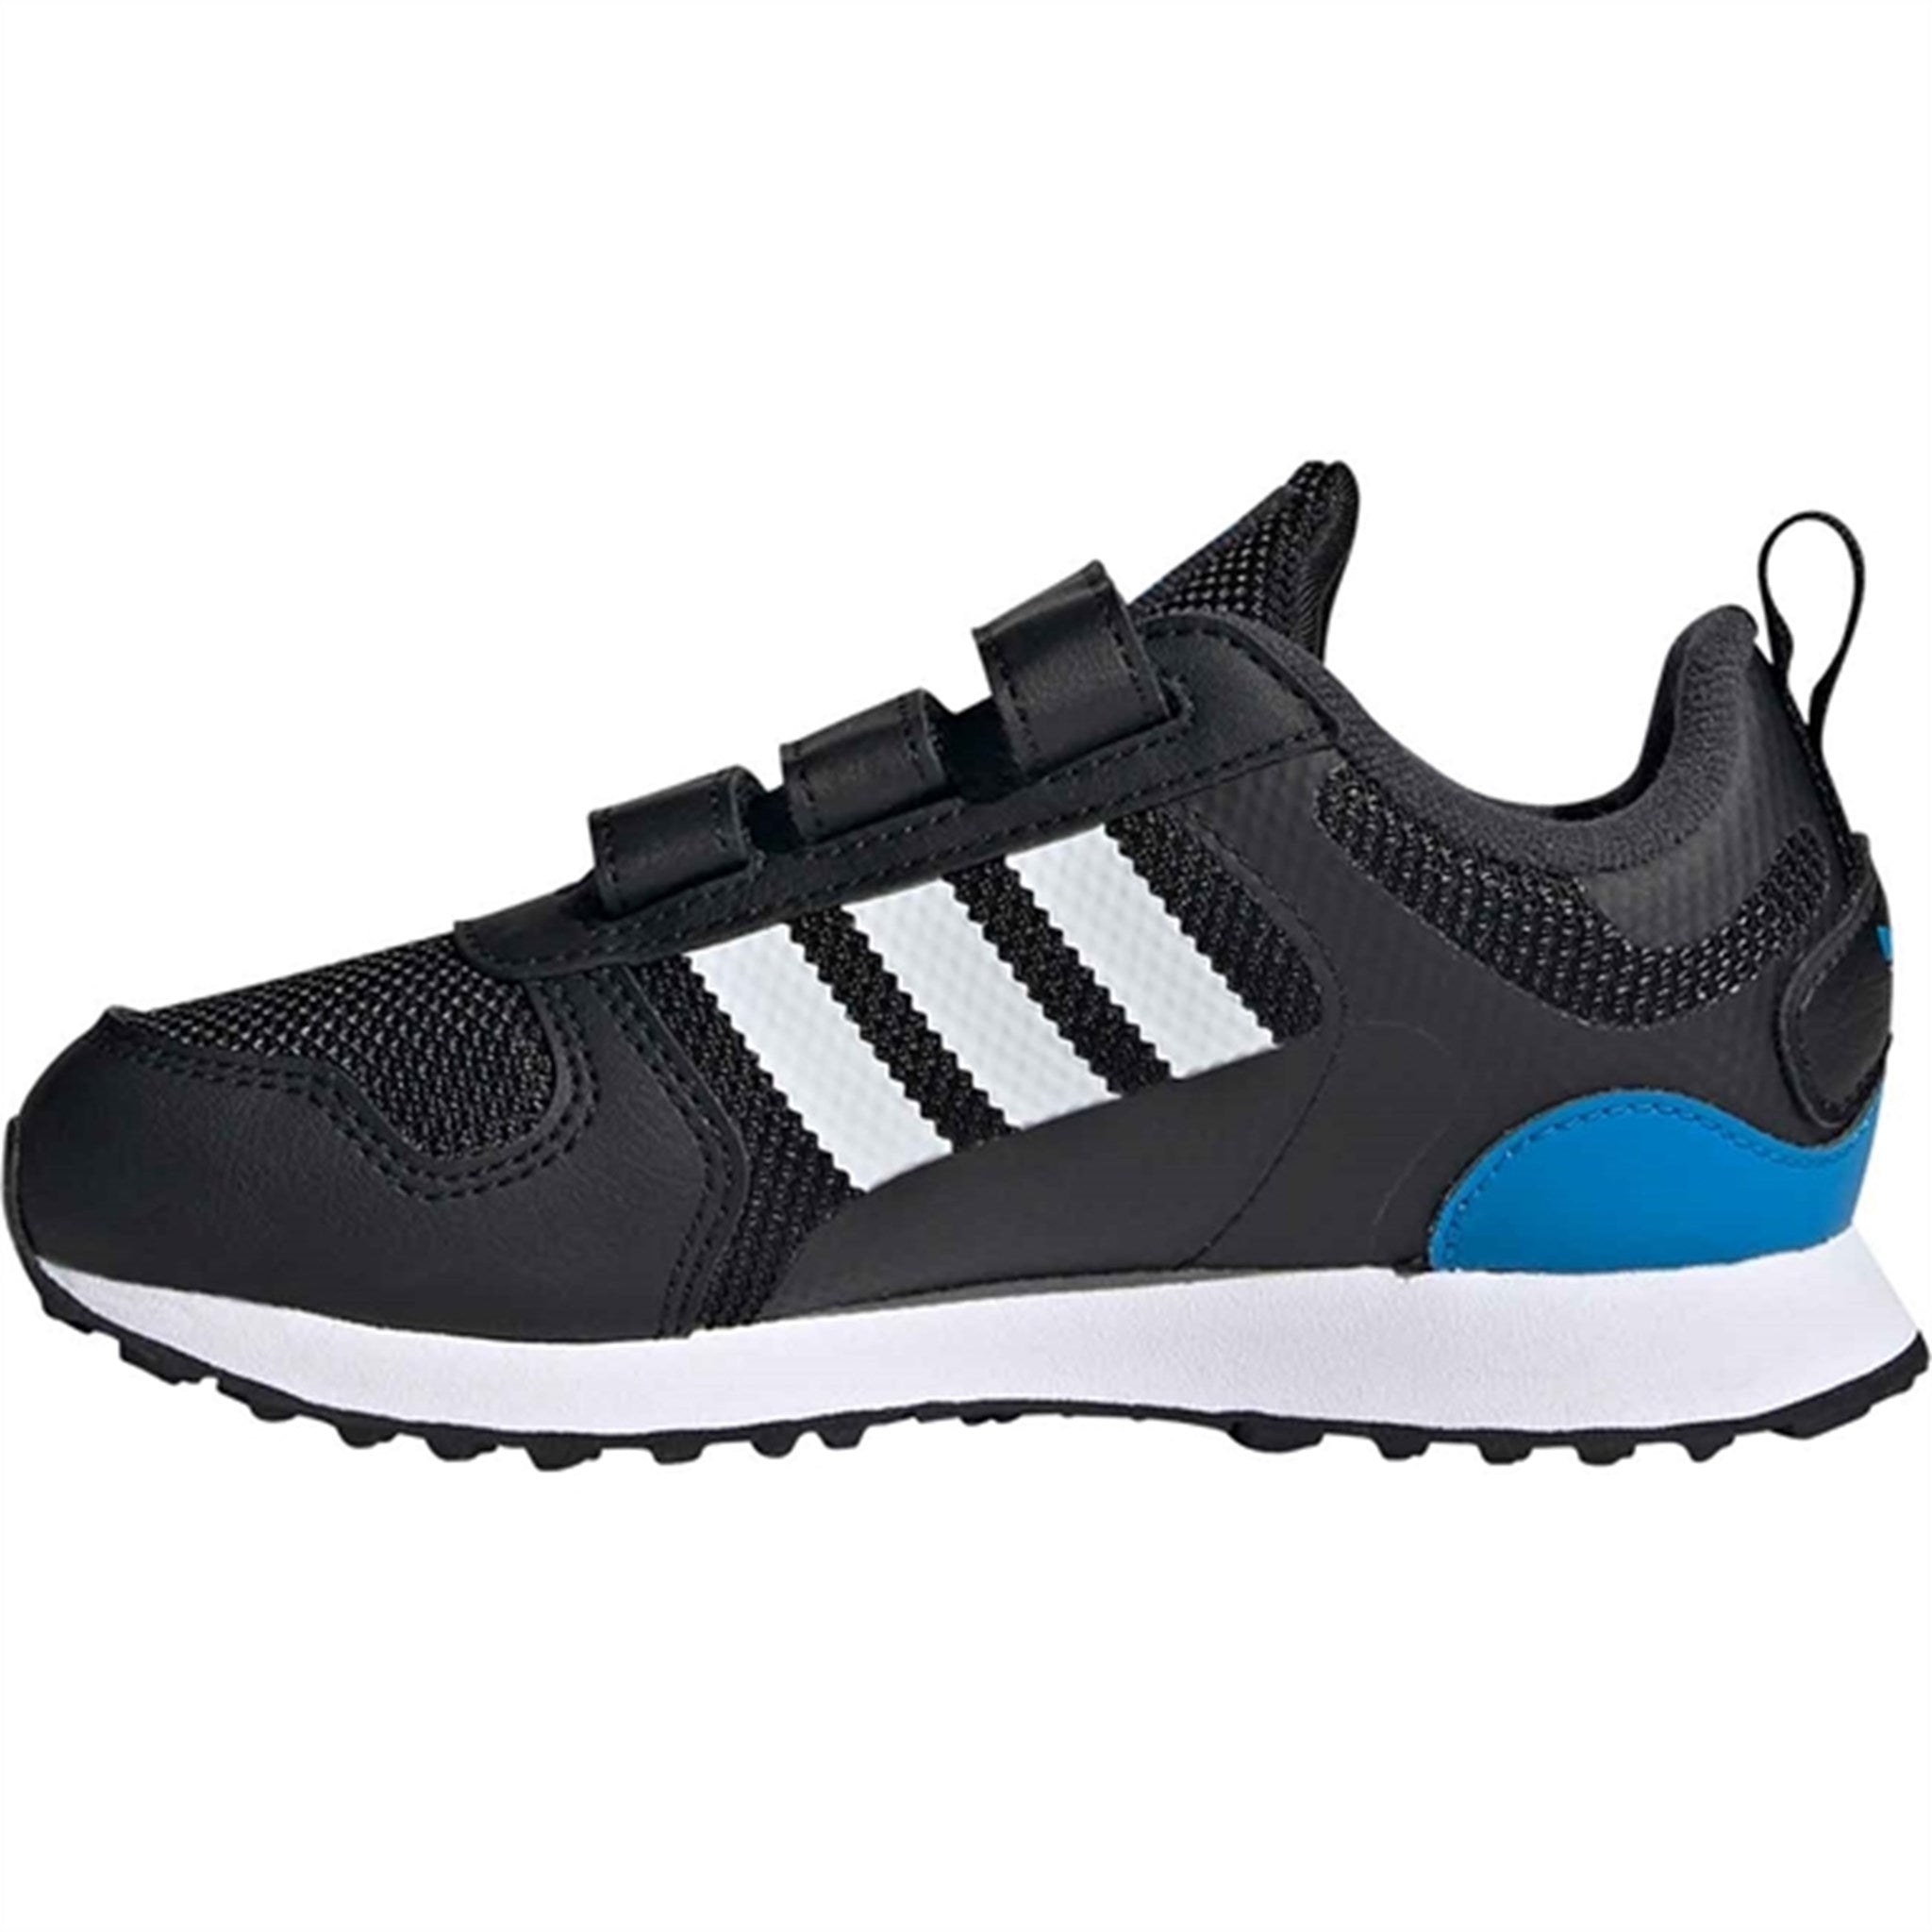 adidas ZX 700 HD Sneakers Black White Carbon 5